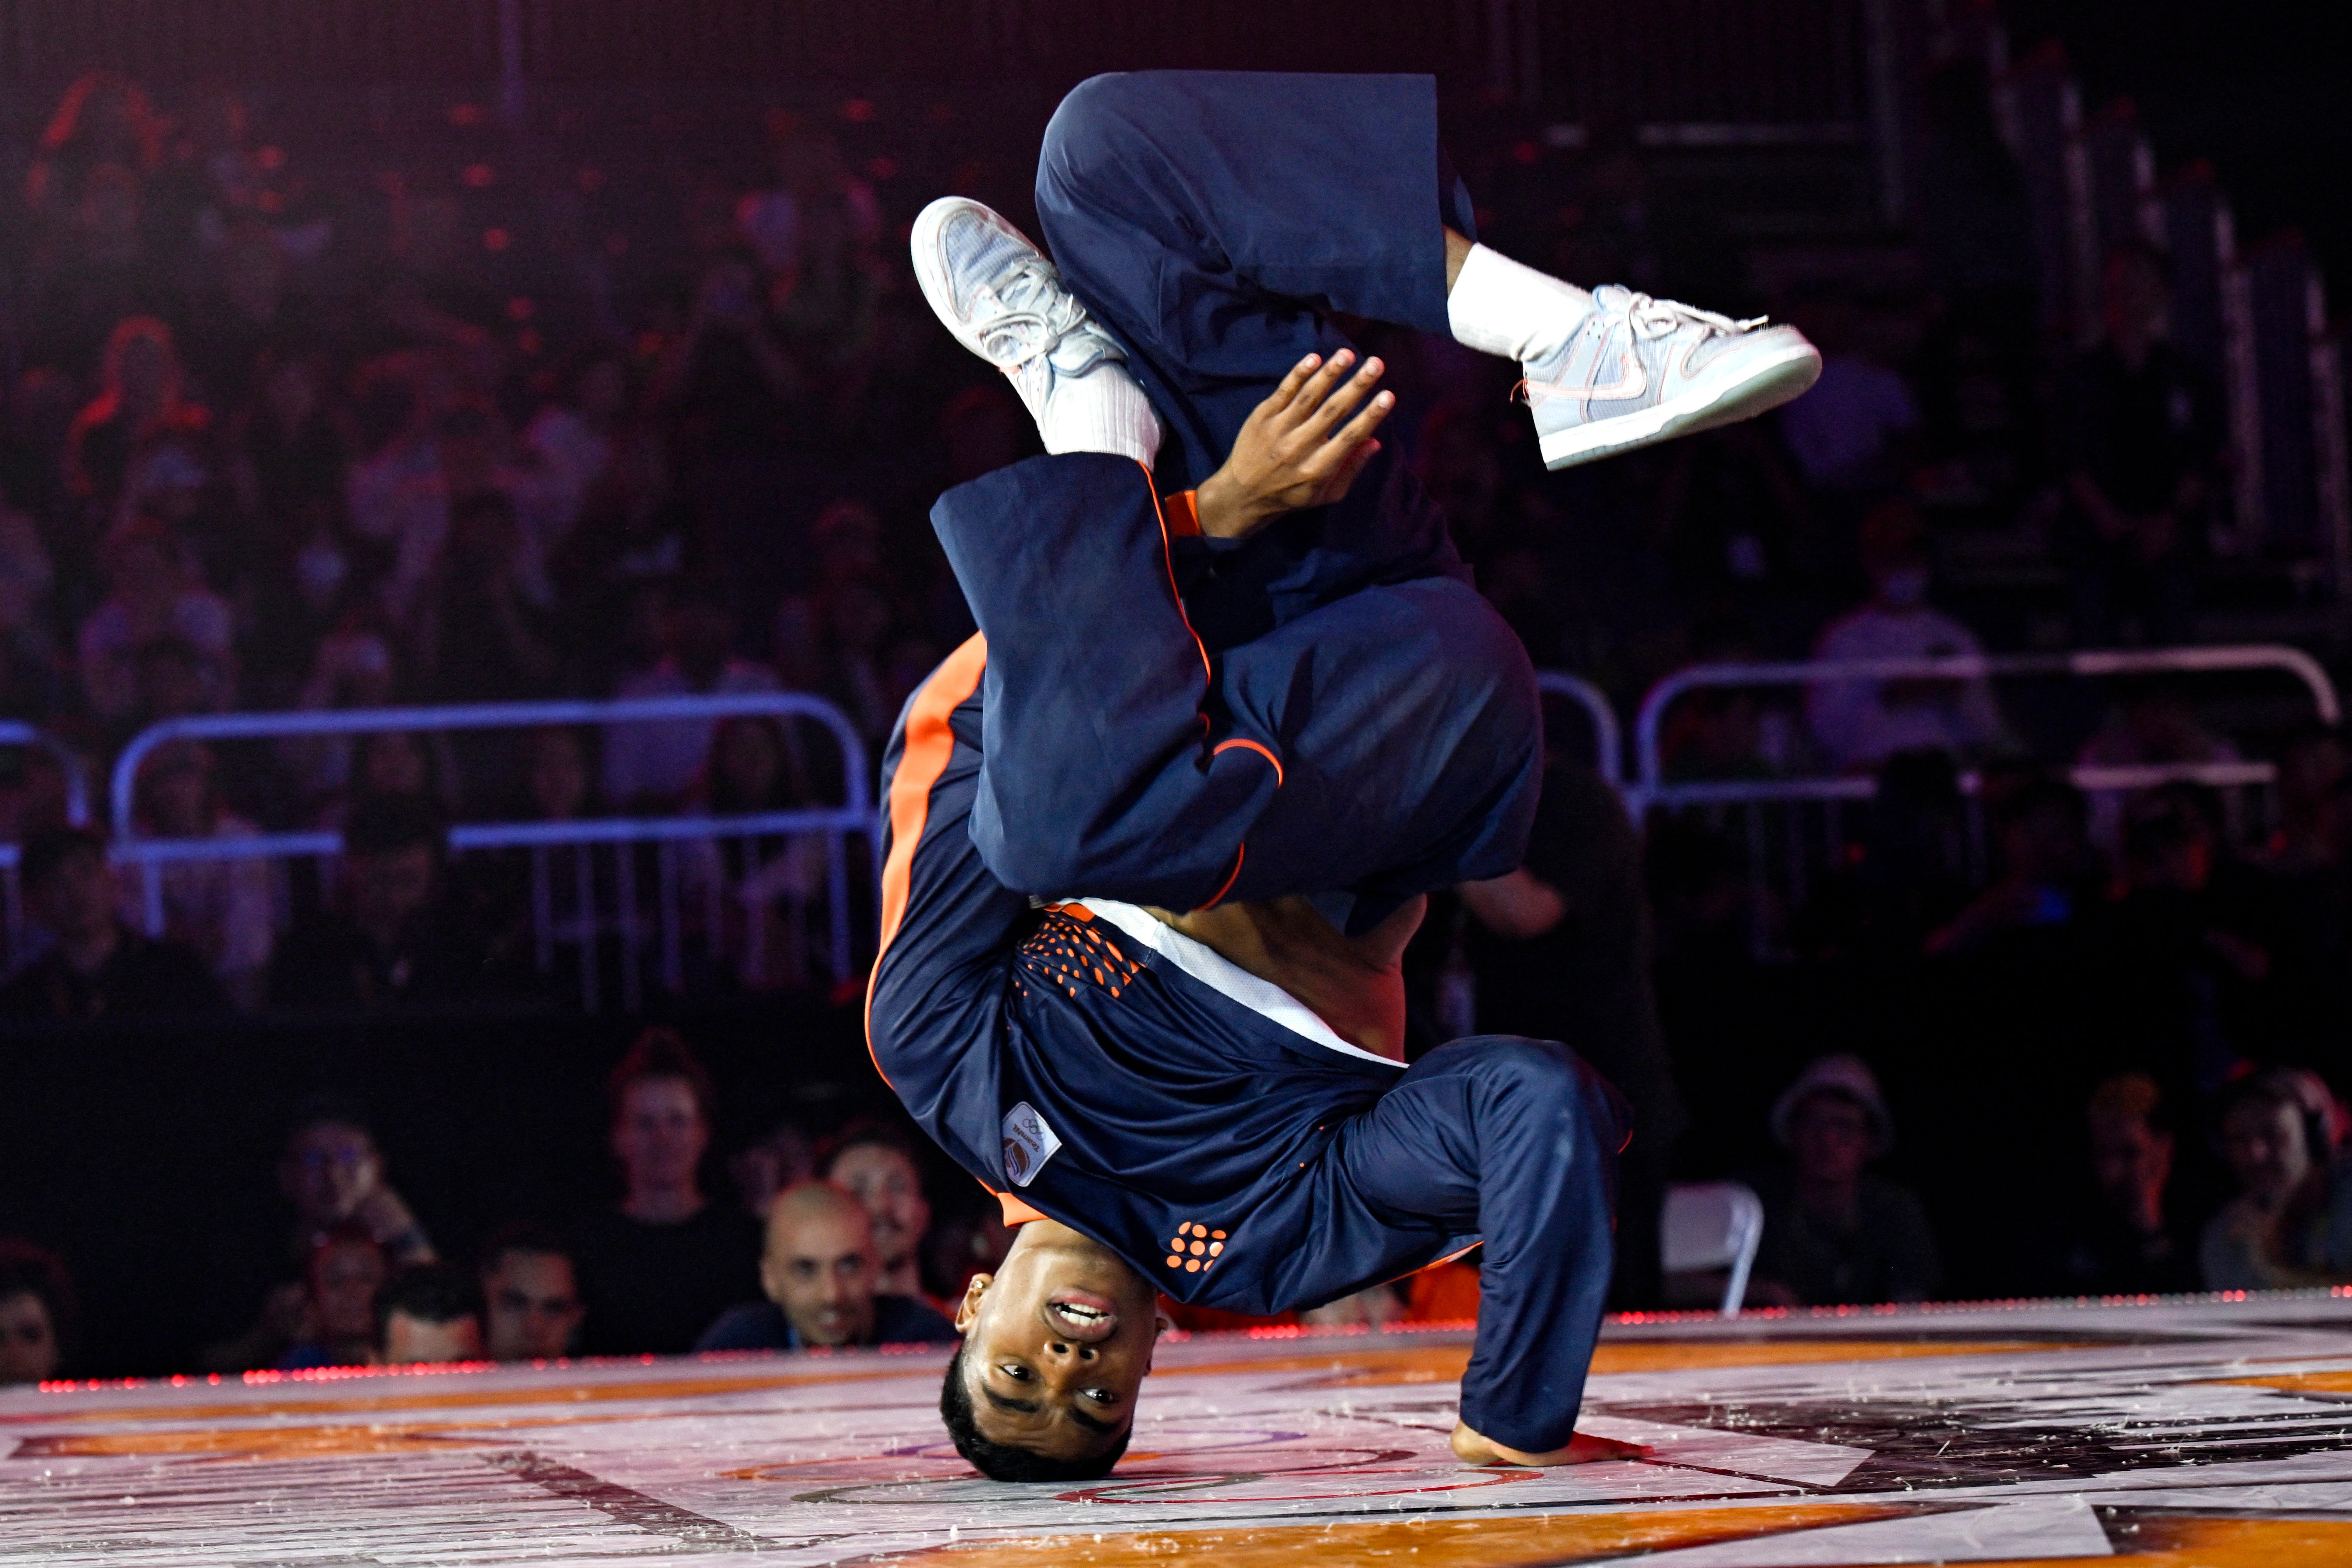 Breakdancer on his head with twisted arms and legs in blue sports suit with orange trim.